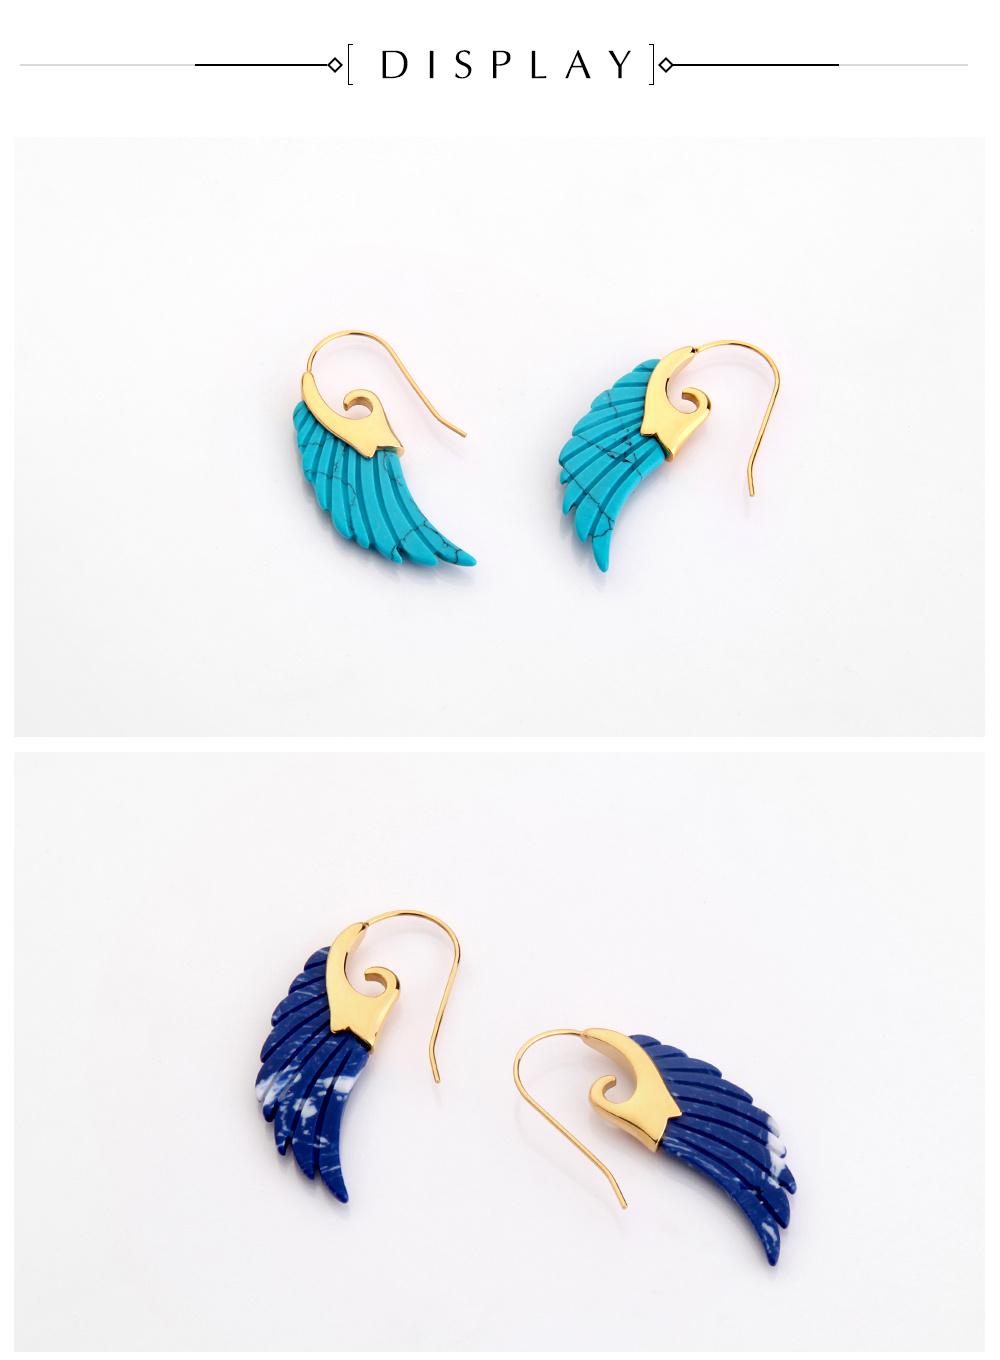 Enamel Stone Earring with Different Texture in Wing Carving Shape